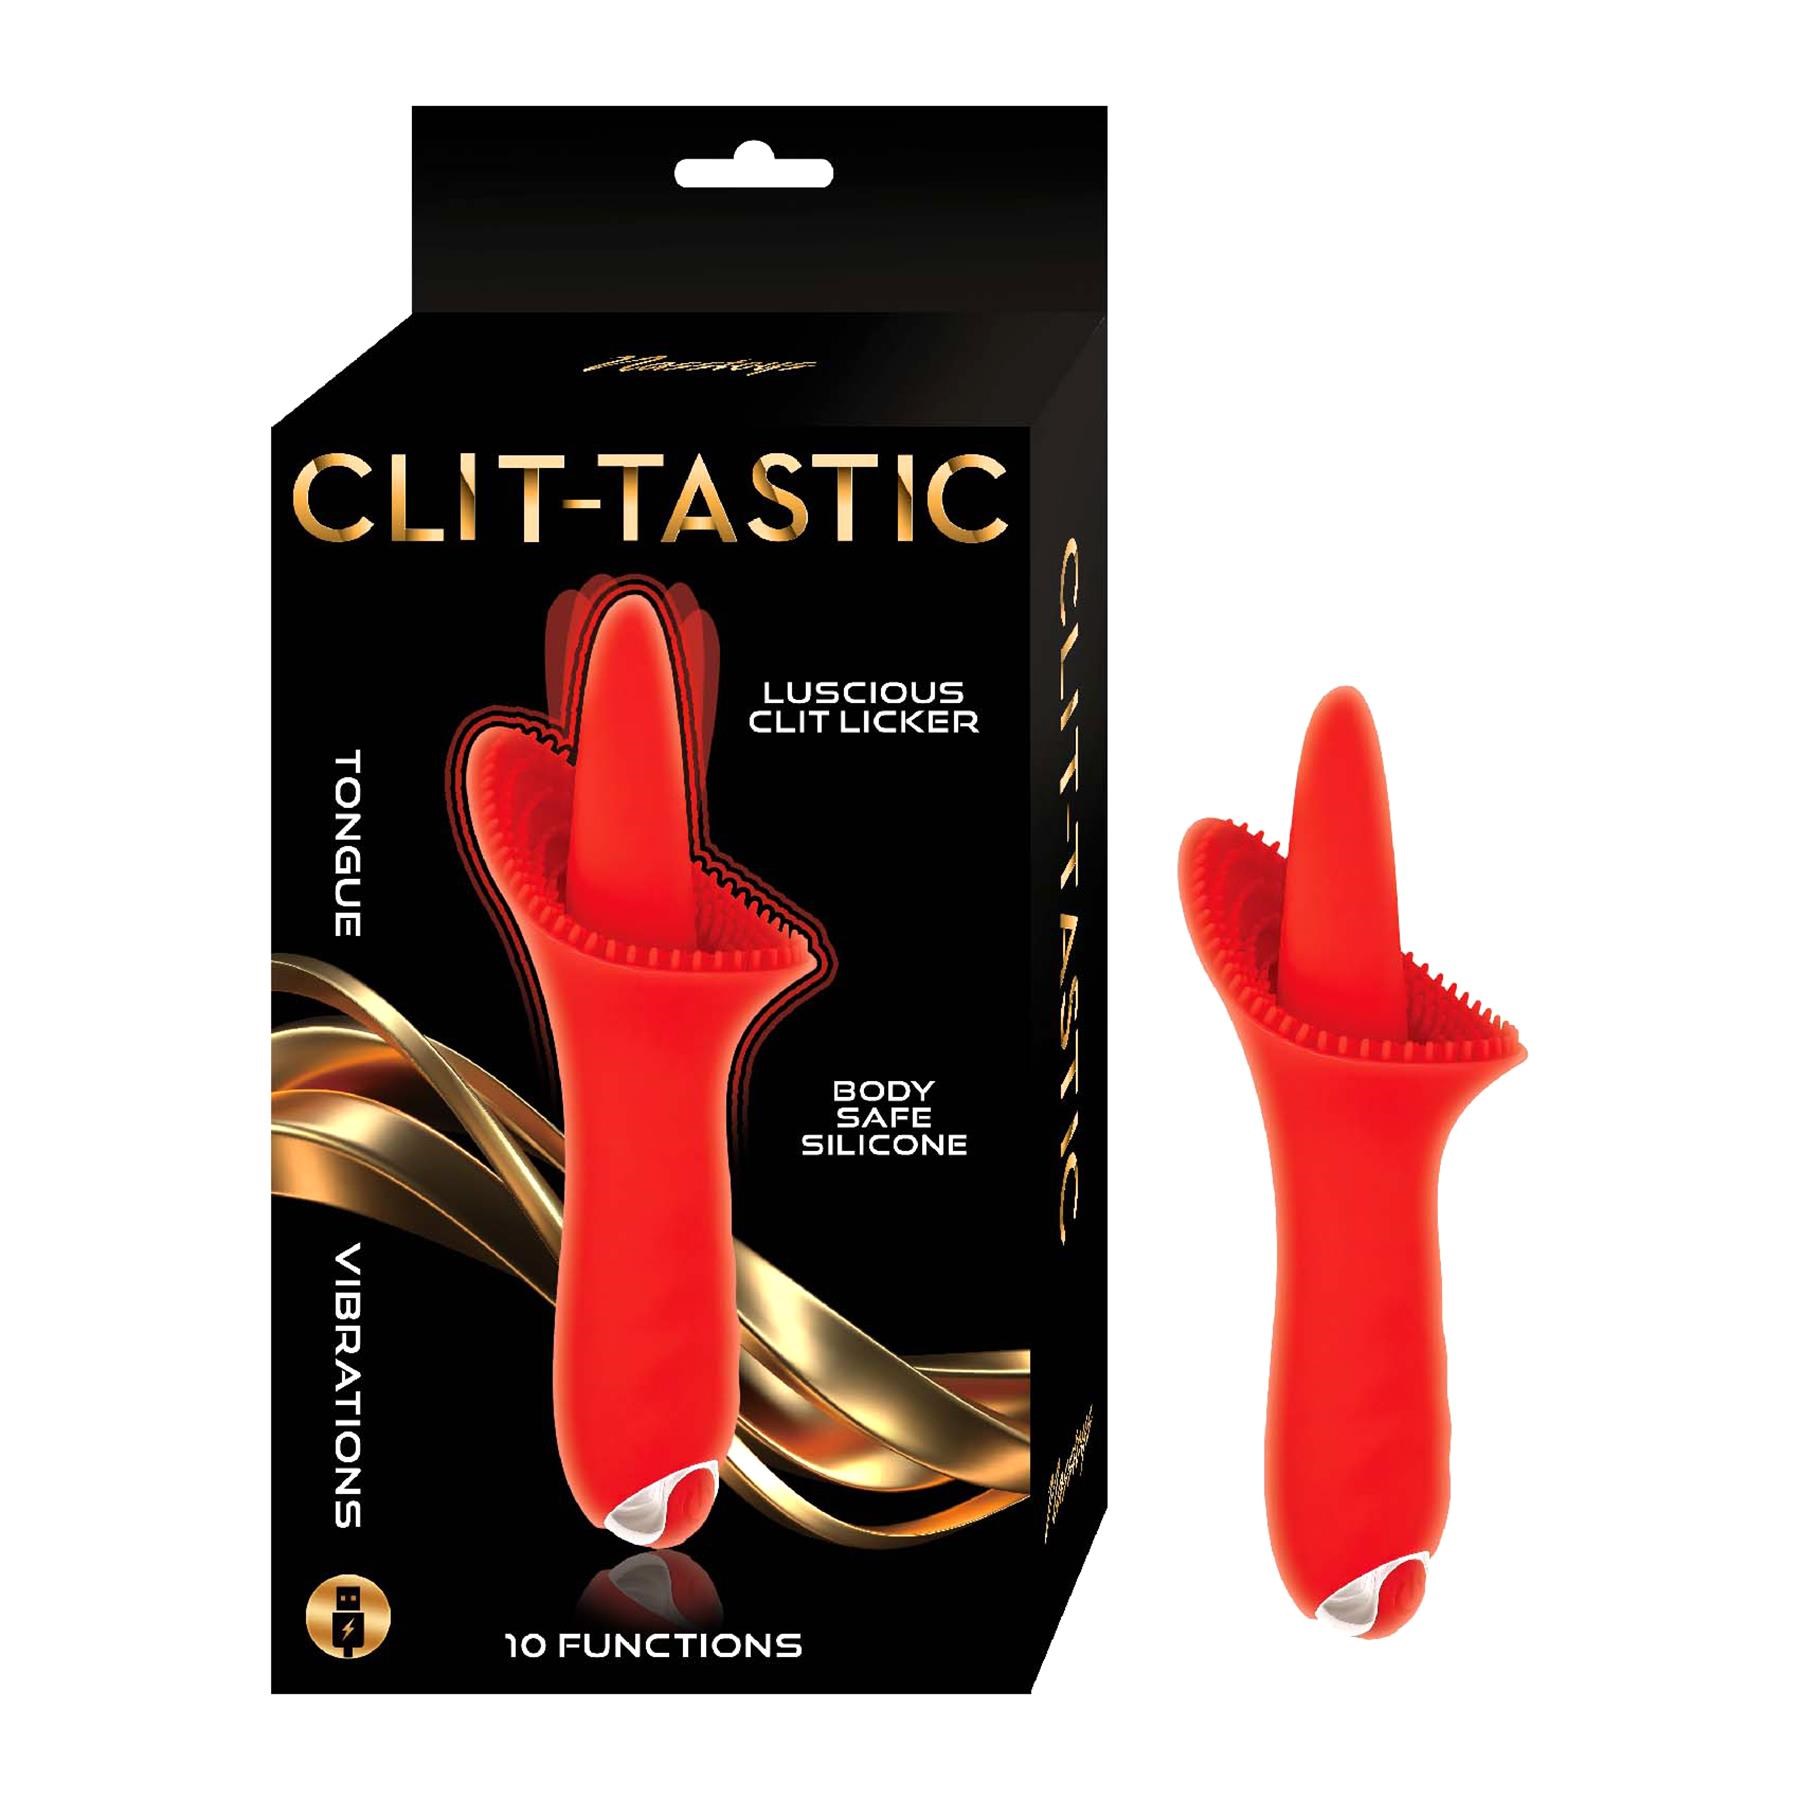 Clit-Tastic Luscious Clit Licker - Product and Packaging Shot